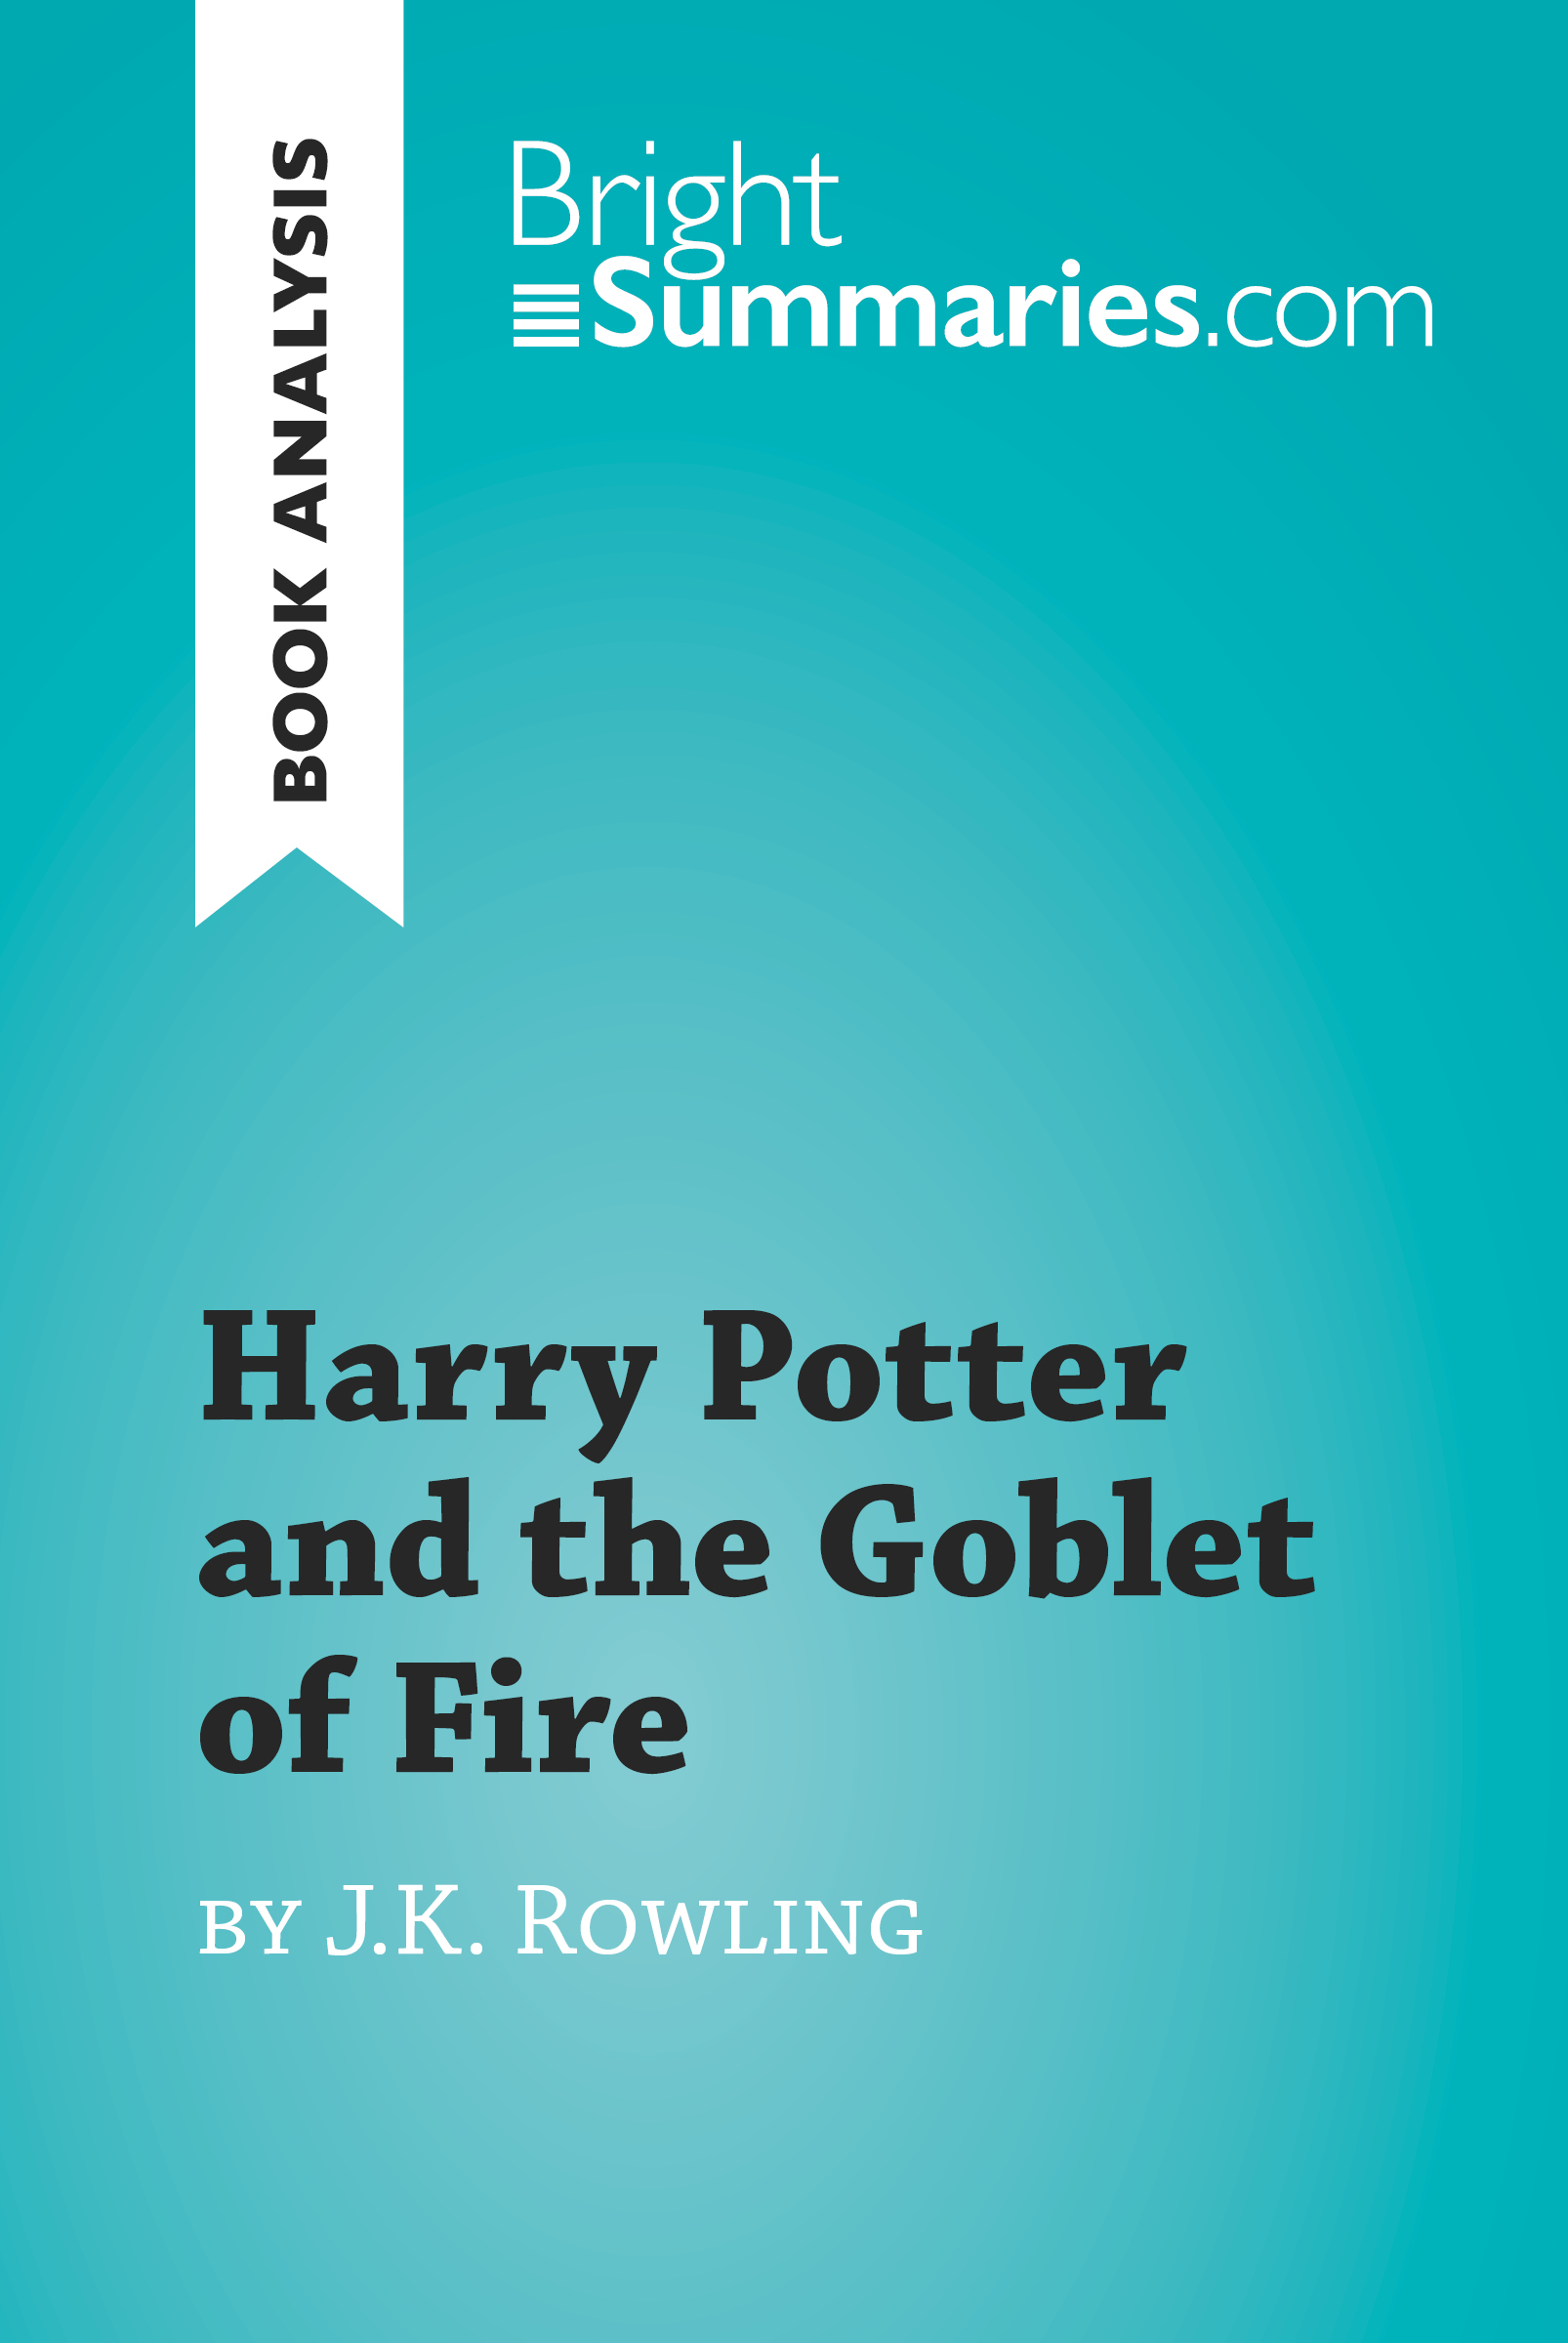 harry potter and the goblet of fire chapter summaries